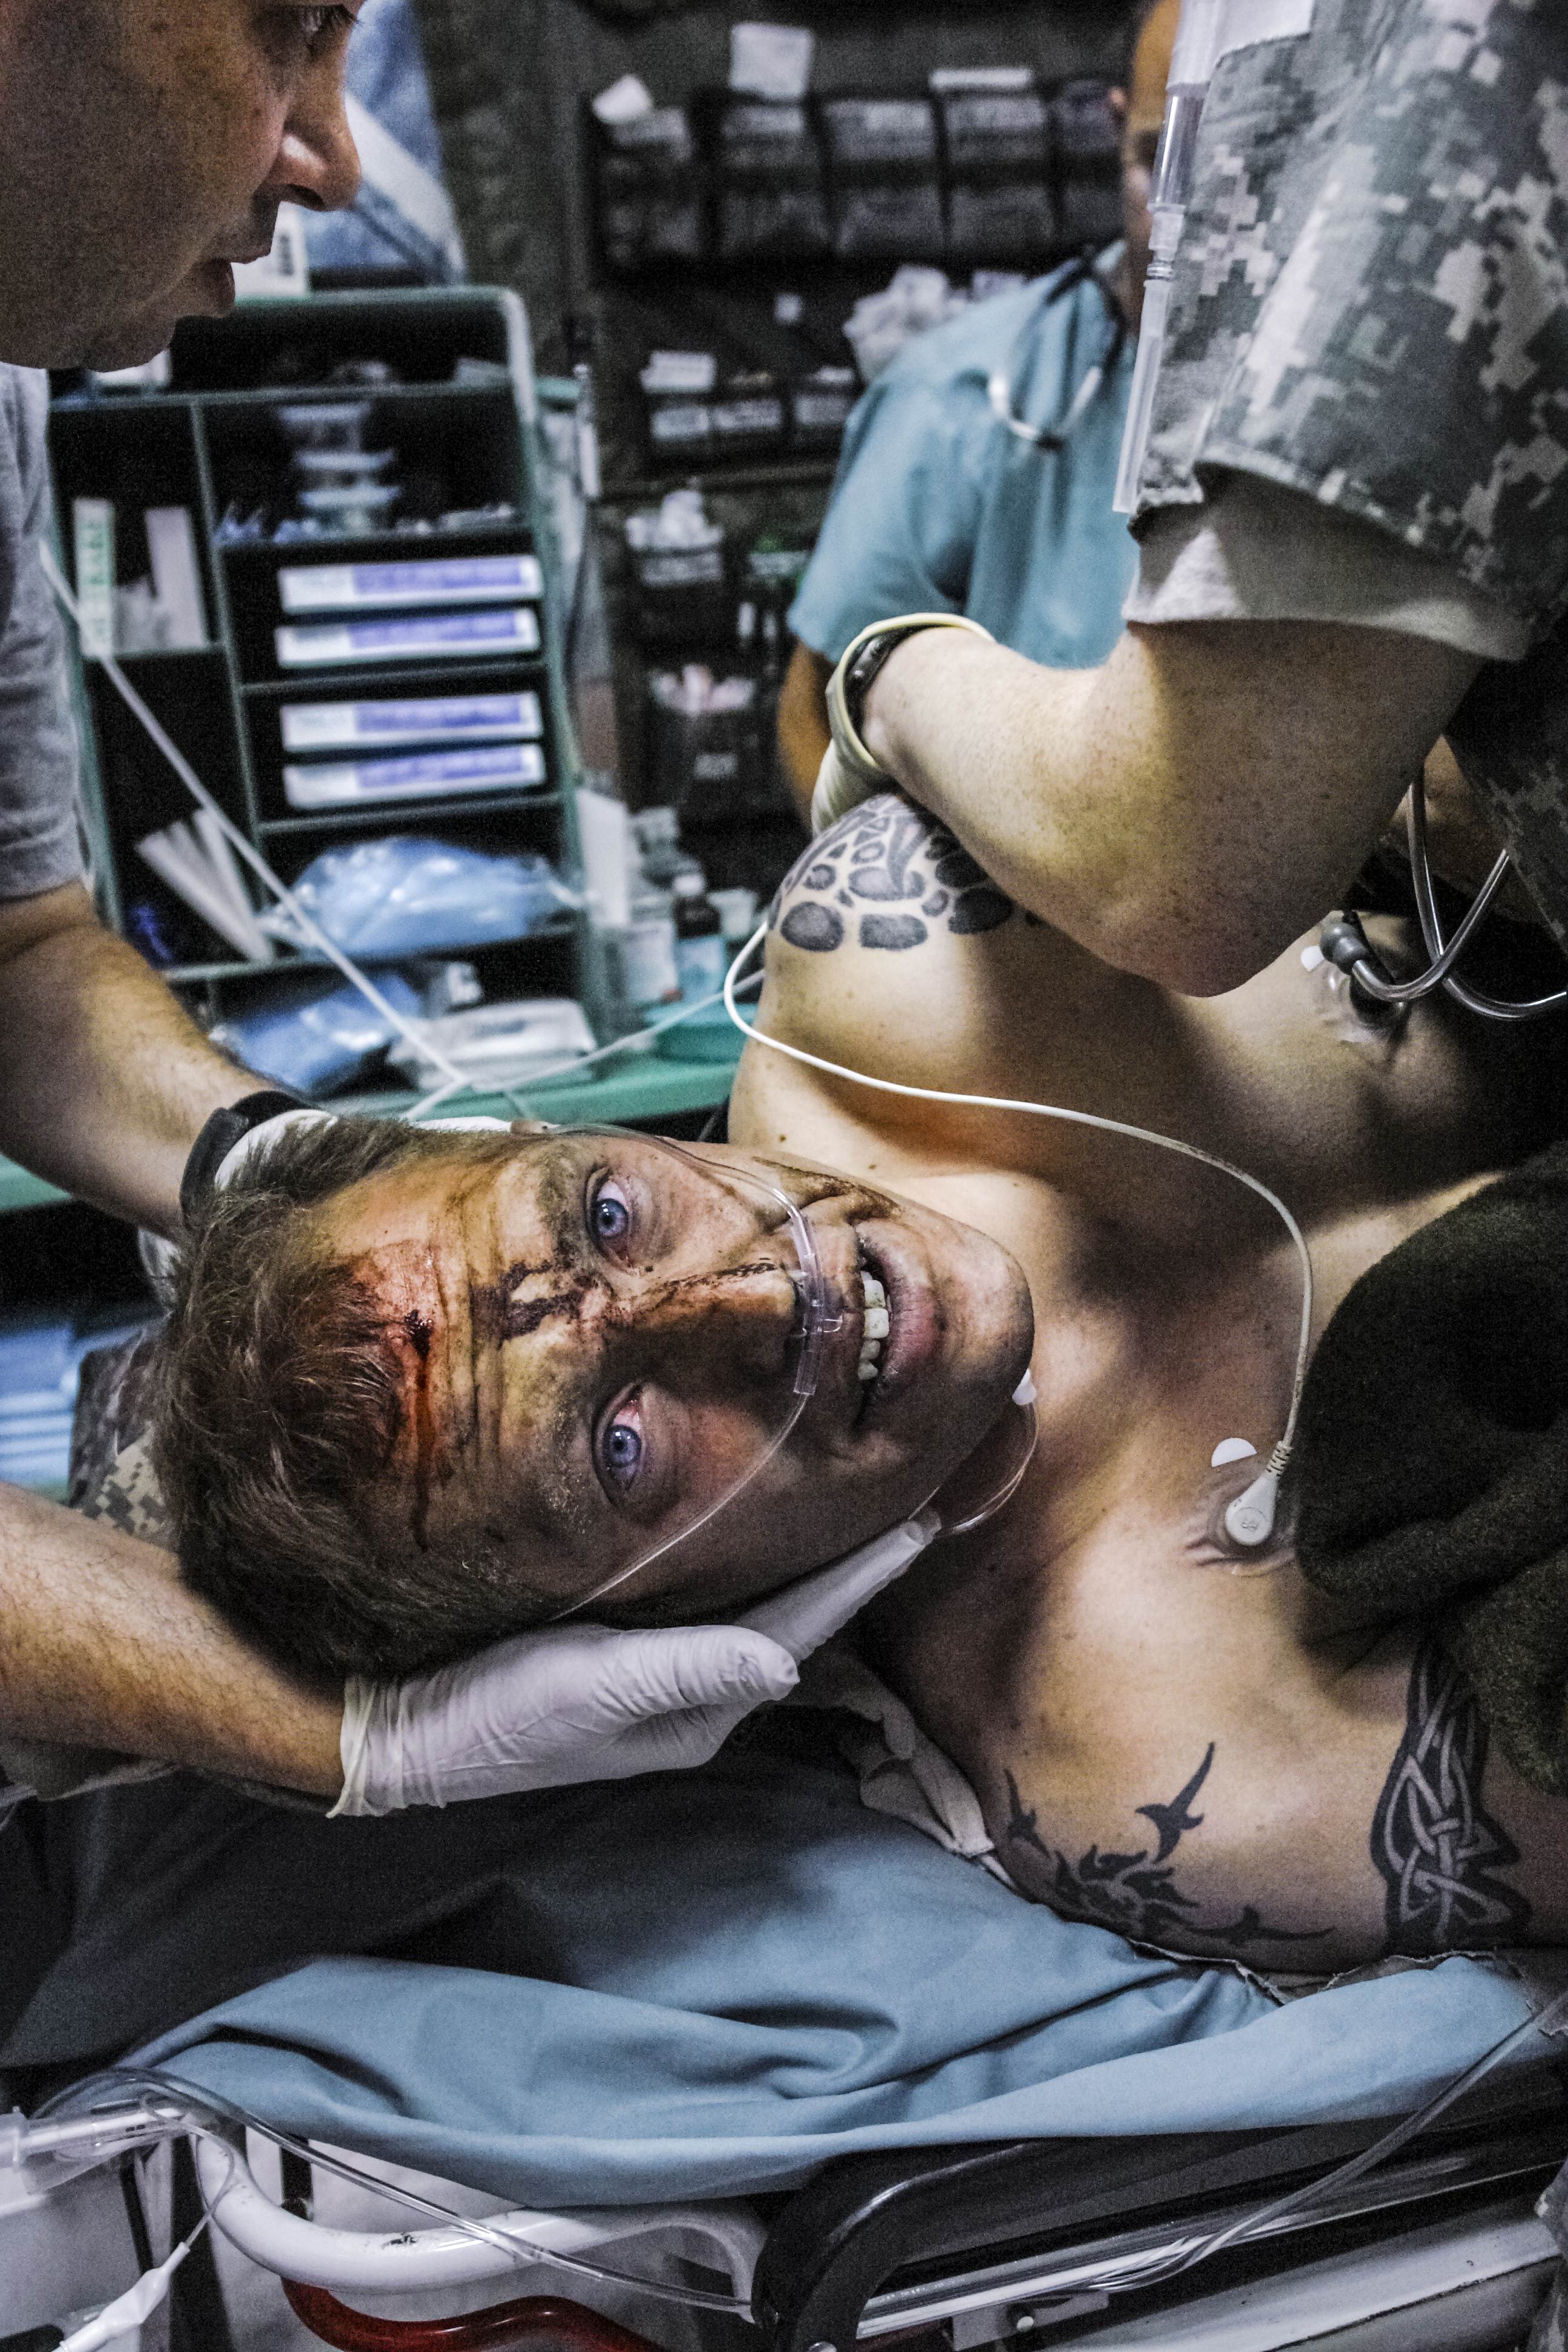 Sergeant Jeff Reffner, minutes after being wounded in an explosion. He had been on a convoy
                              sweeping for IEDs when his commander ordered the driver to speed up. They were moving too
                              fast to see the bomb on the road. When he recovered consciousness moments after the blast,
                              Reffner tried to lift his leg and it just “folded in half.” He spent several years at Walter Reed
                              Hospital and has had thirty-one surgeries on the leg. Although he is in good spirits and able to
                              walk, doctors have told him that he may suffer from chronic pain for the rest of his life. He has
                              no regrets, saying, “I’d rather me get hurt than one of my friends.”
                              Baghdad, Iraq. 2006